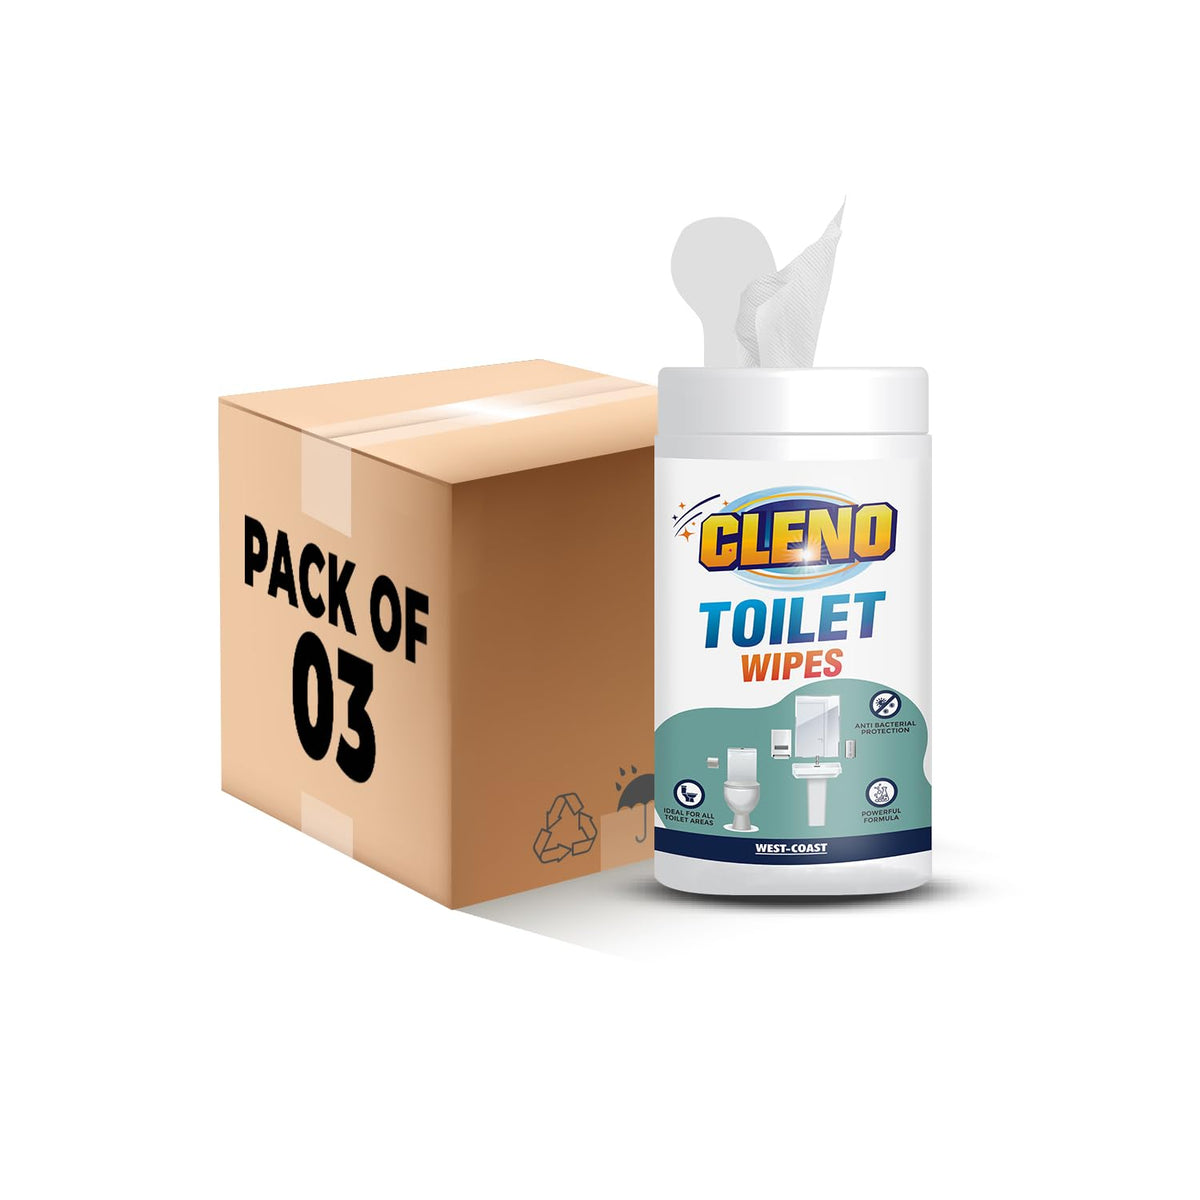 Cleno Toilet Cleaning Wet Wipes For all Toilet Areas like Toilet Commode/Toilet Seats/Flush/Knobs/Wash-basin - 50 Wipes (Pack of 3) (Ready to Use)